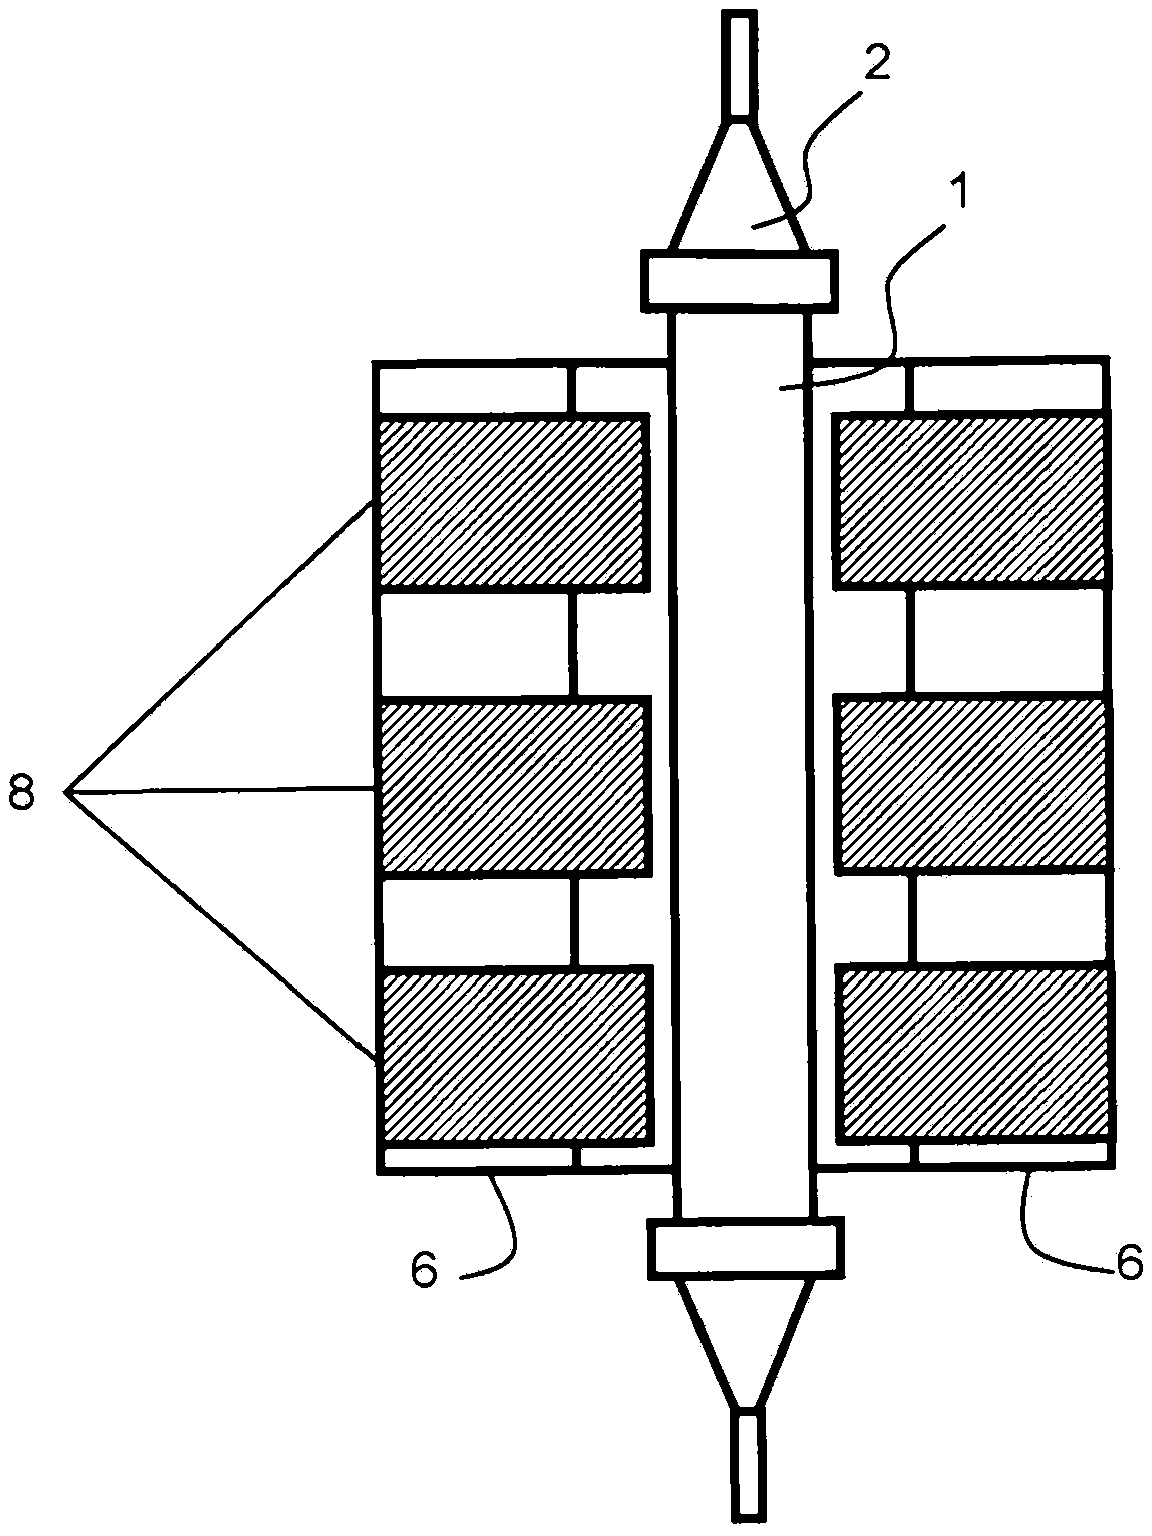 Methods of capturing bindable targets from liquids